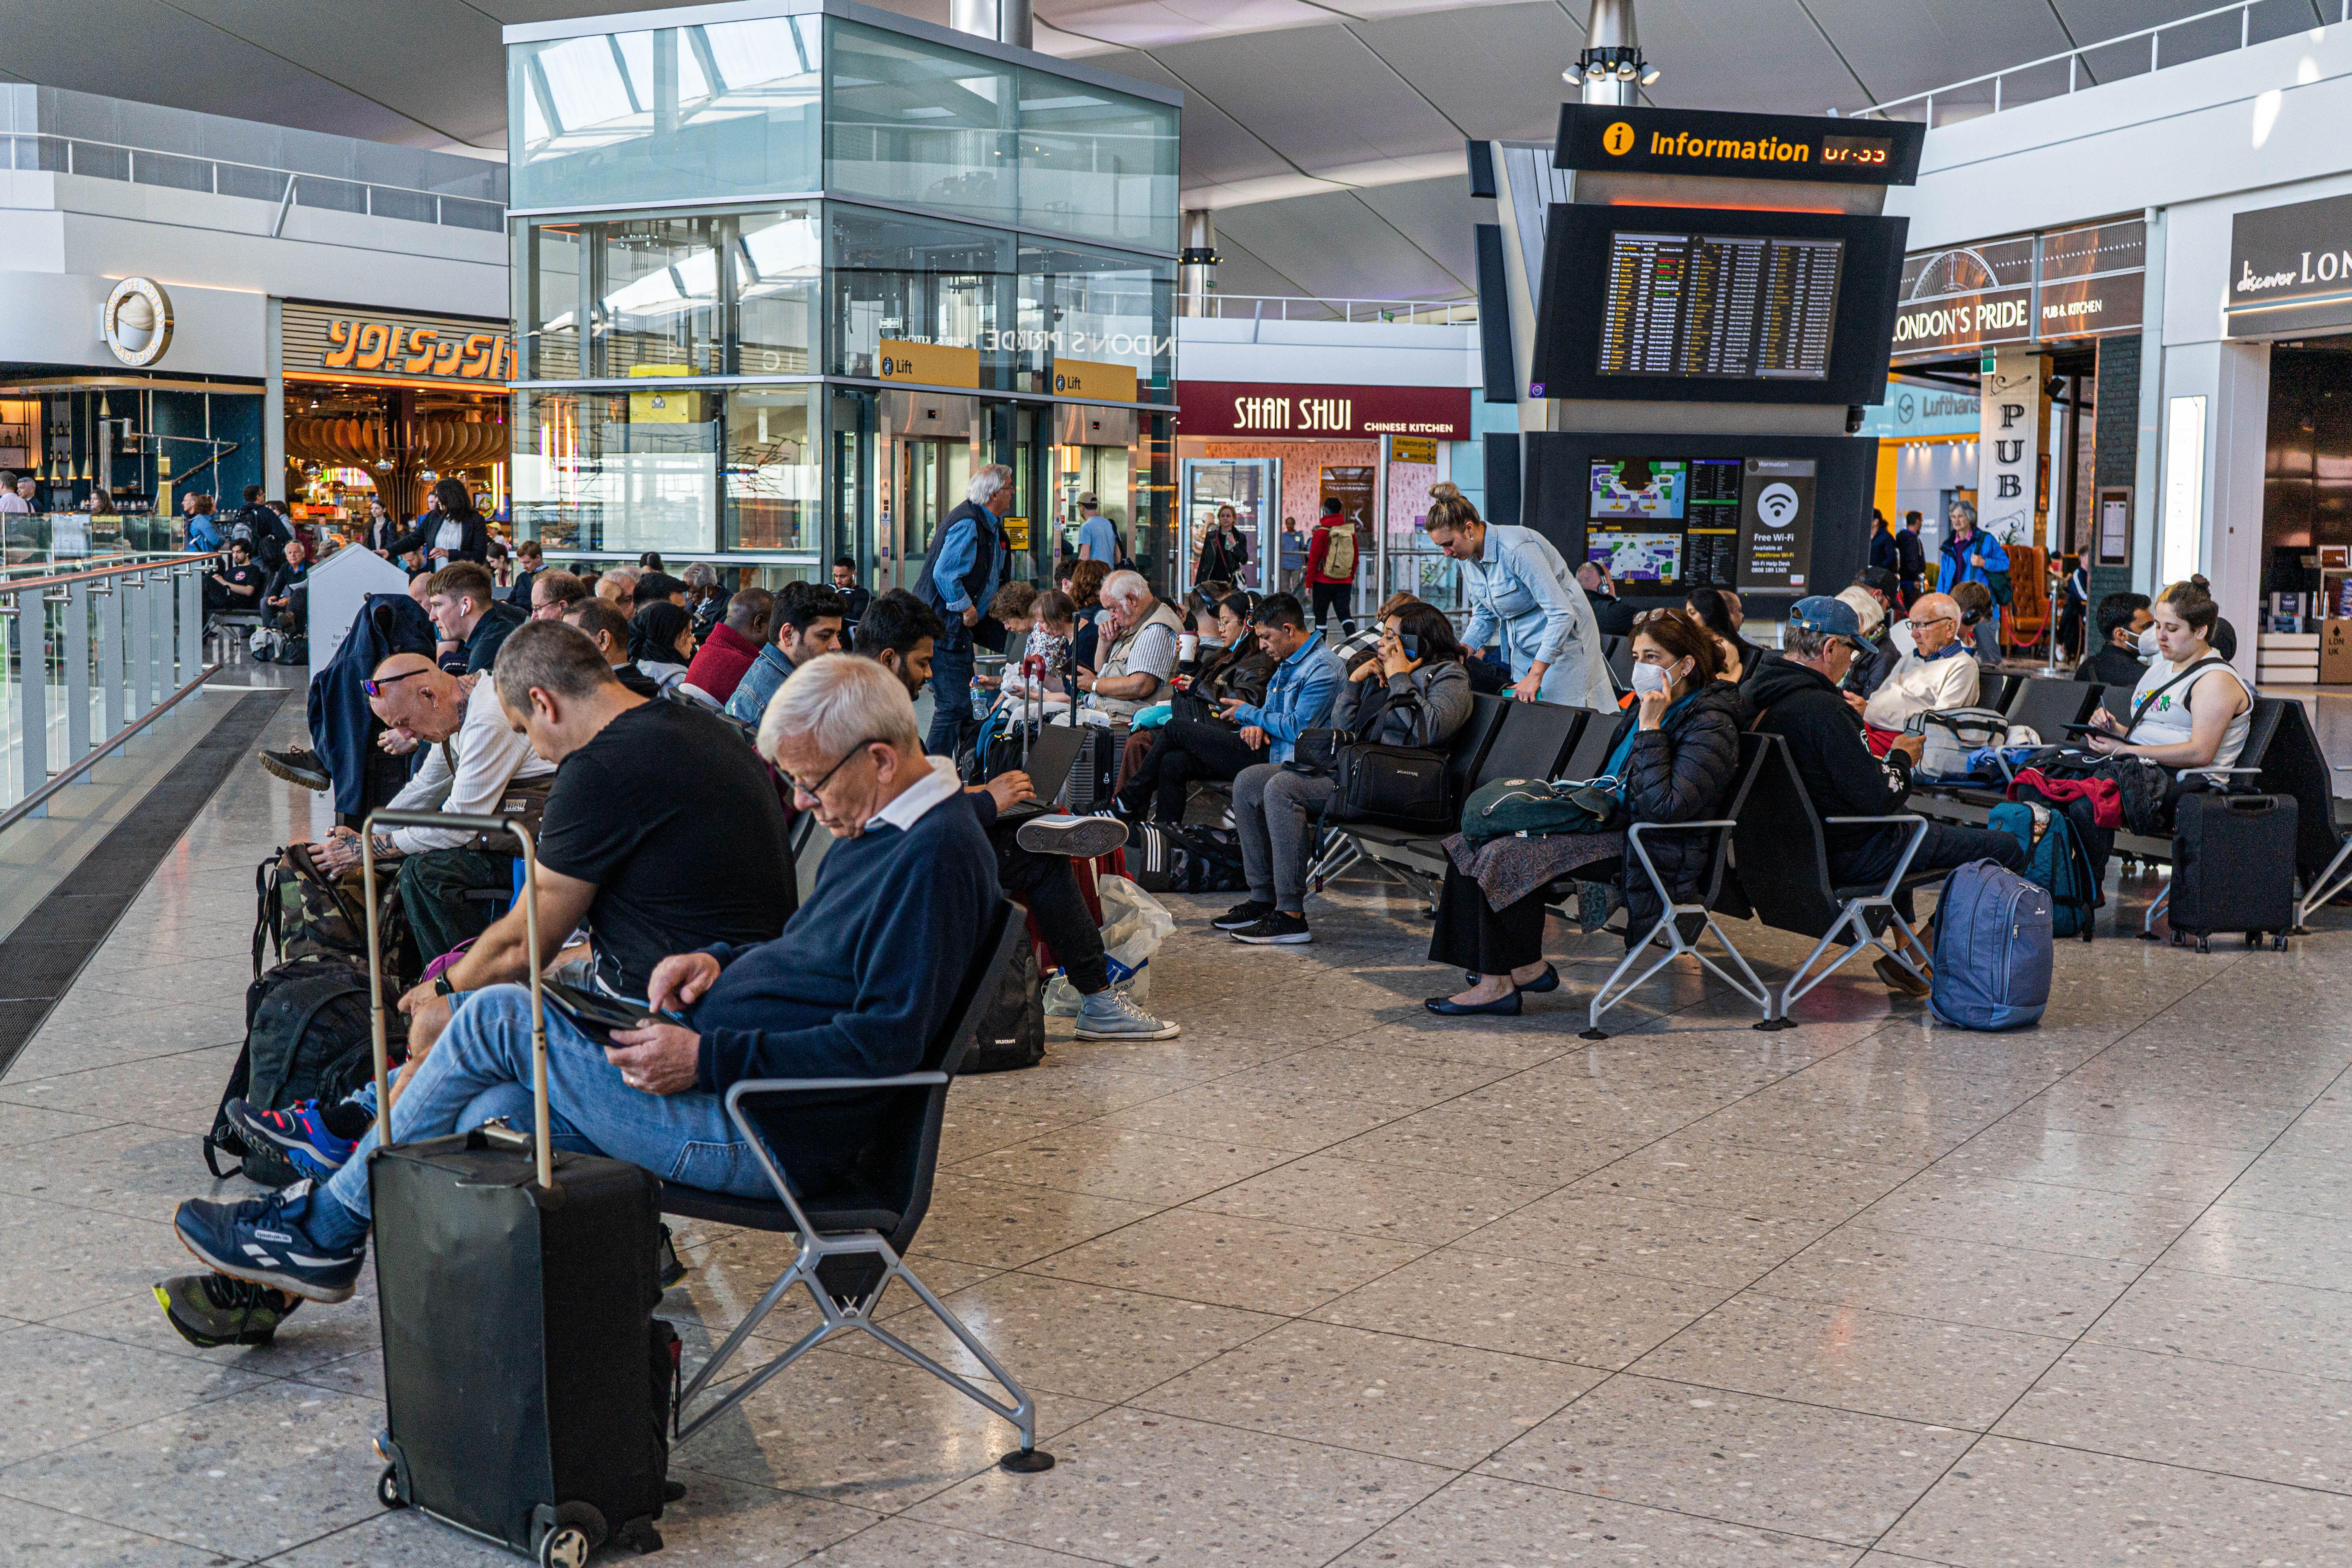 Heathrow airport Terminal 2 is busy with passengers which has been affected from severe staff shortages, leading to many flight cancellations and airport disruption and leaving potentially thousands of passengers stranded abroad